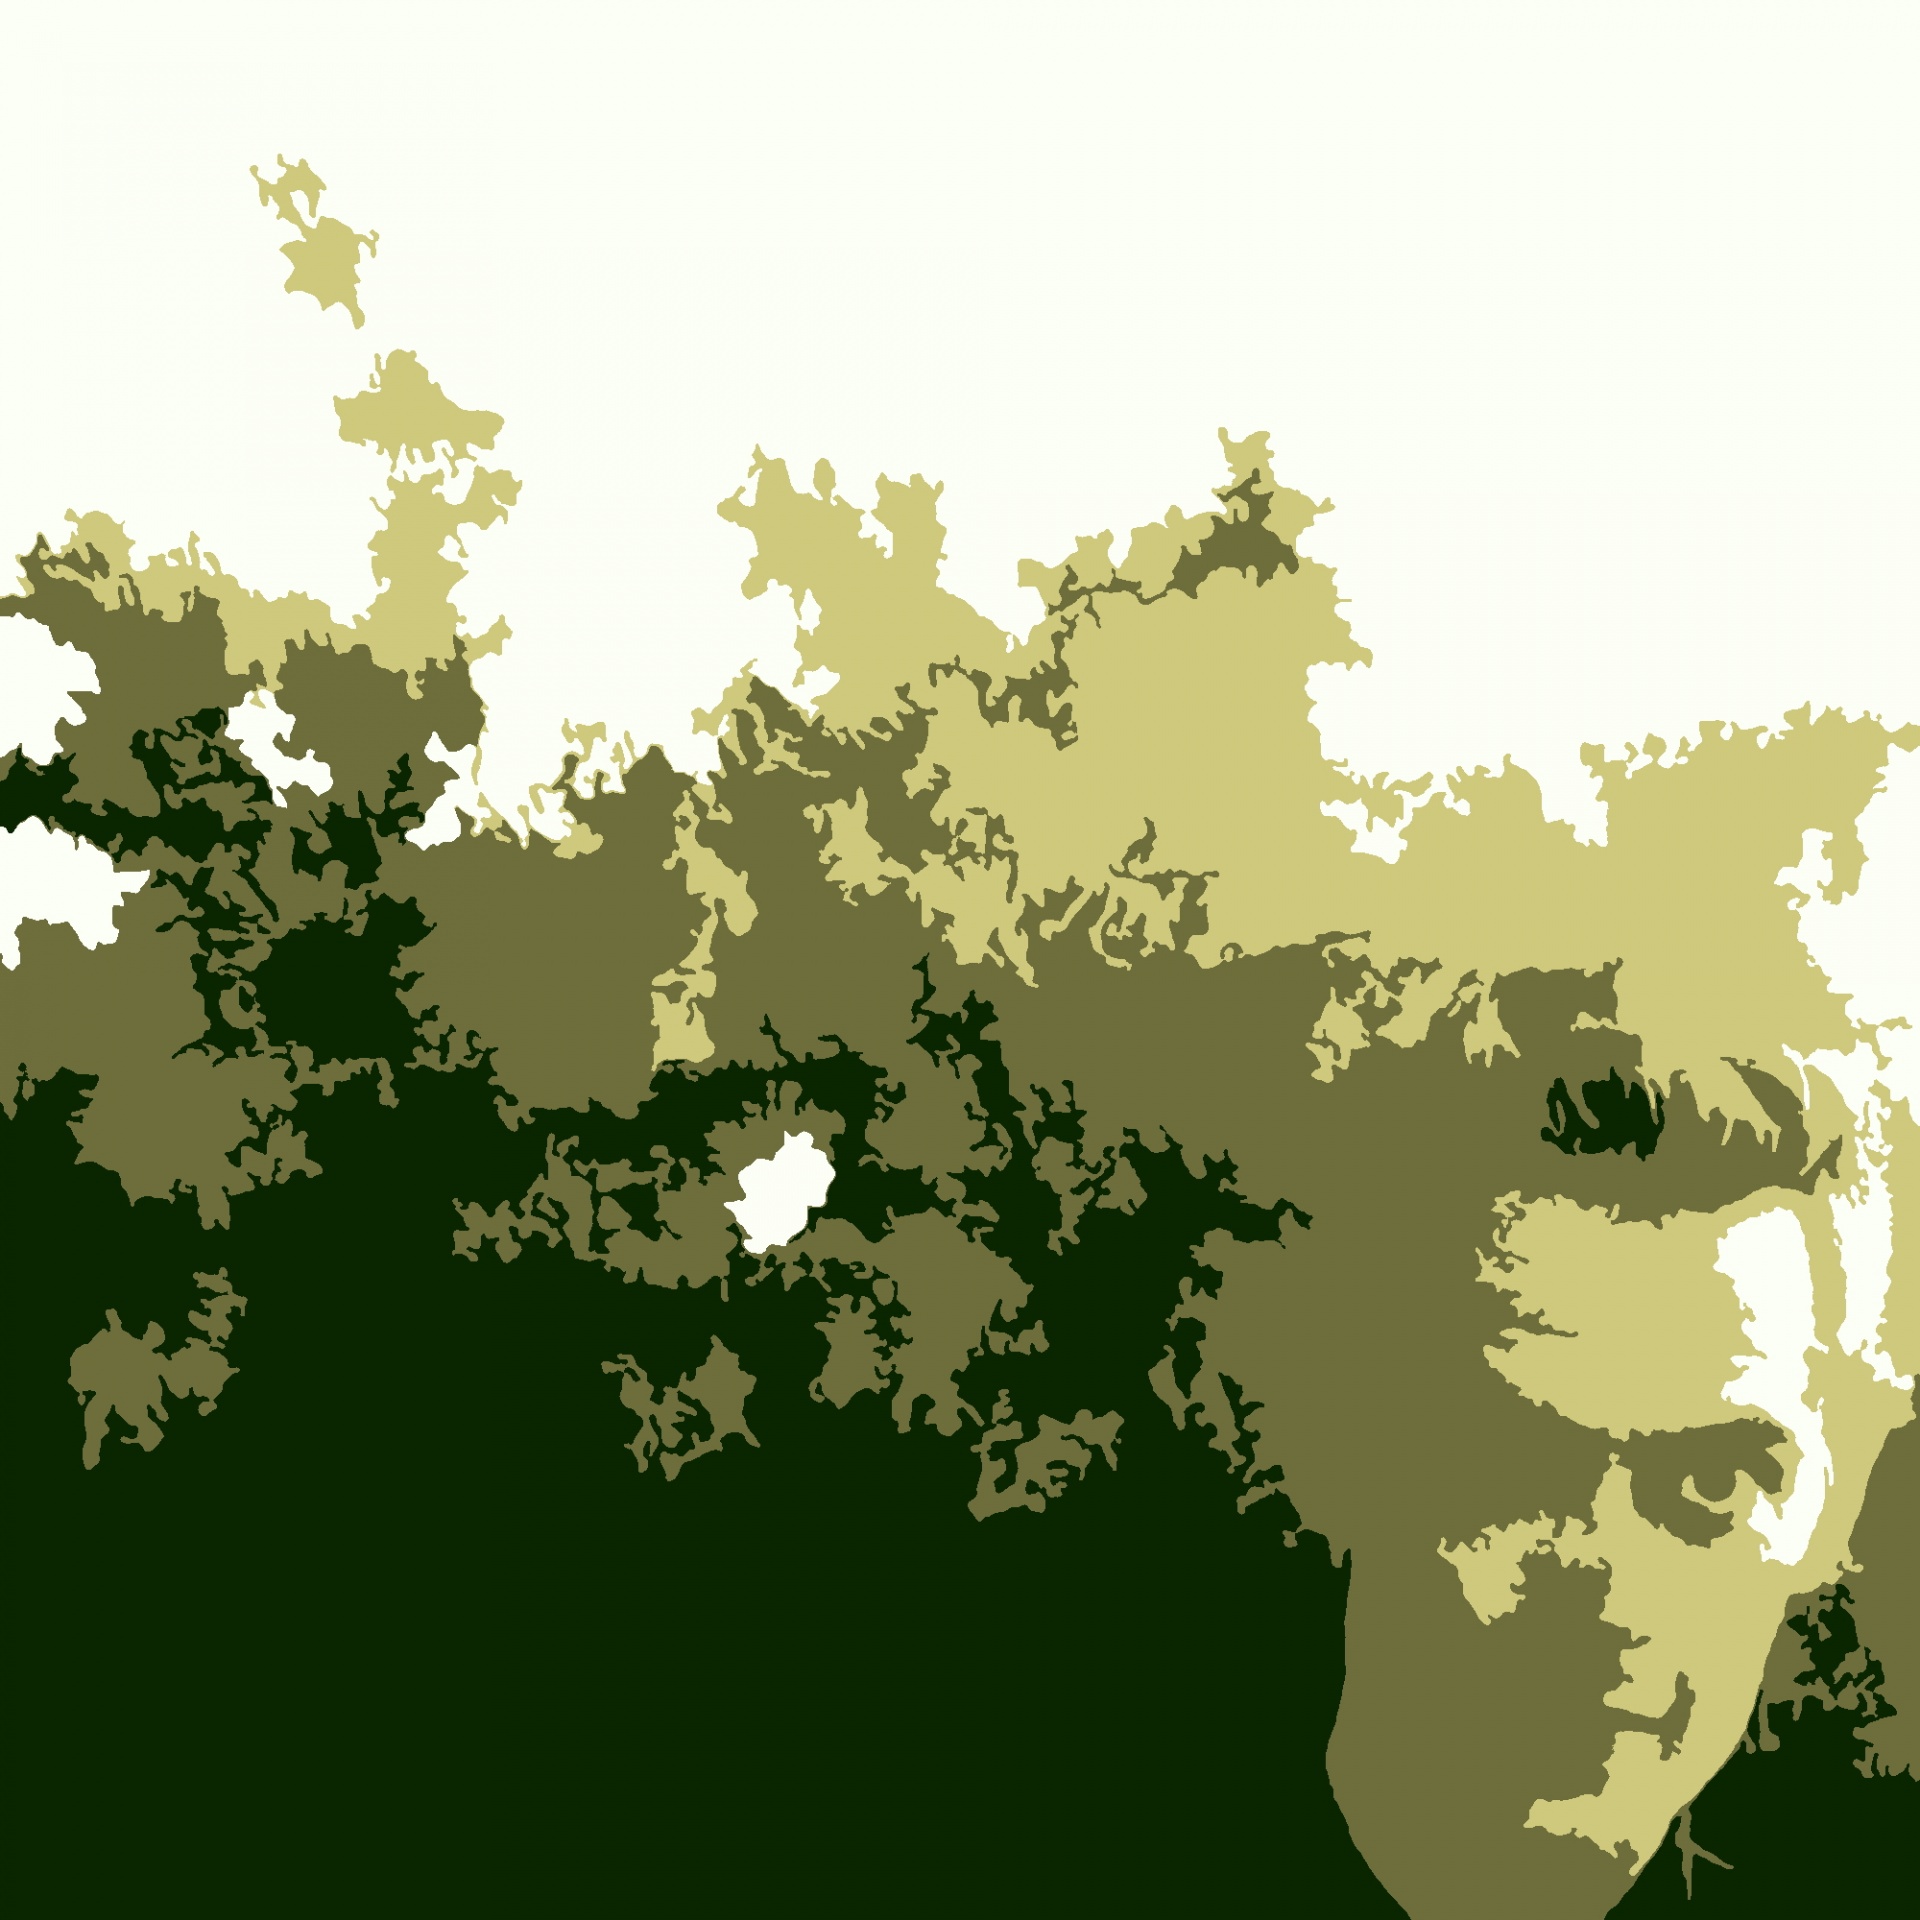 A face in the lower right corner with bushes in the background with a cut-out effect applied.